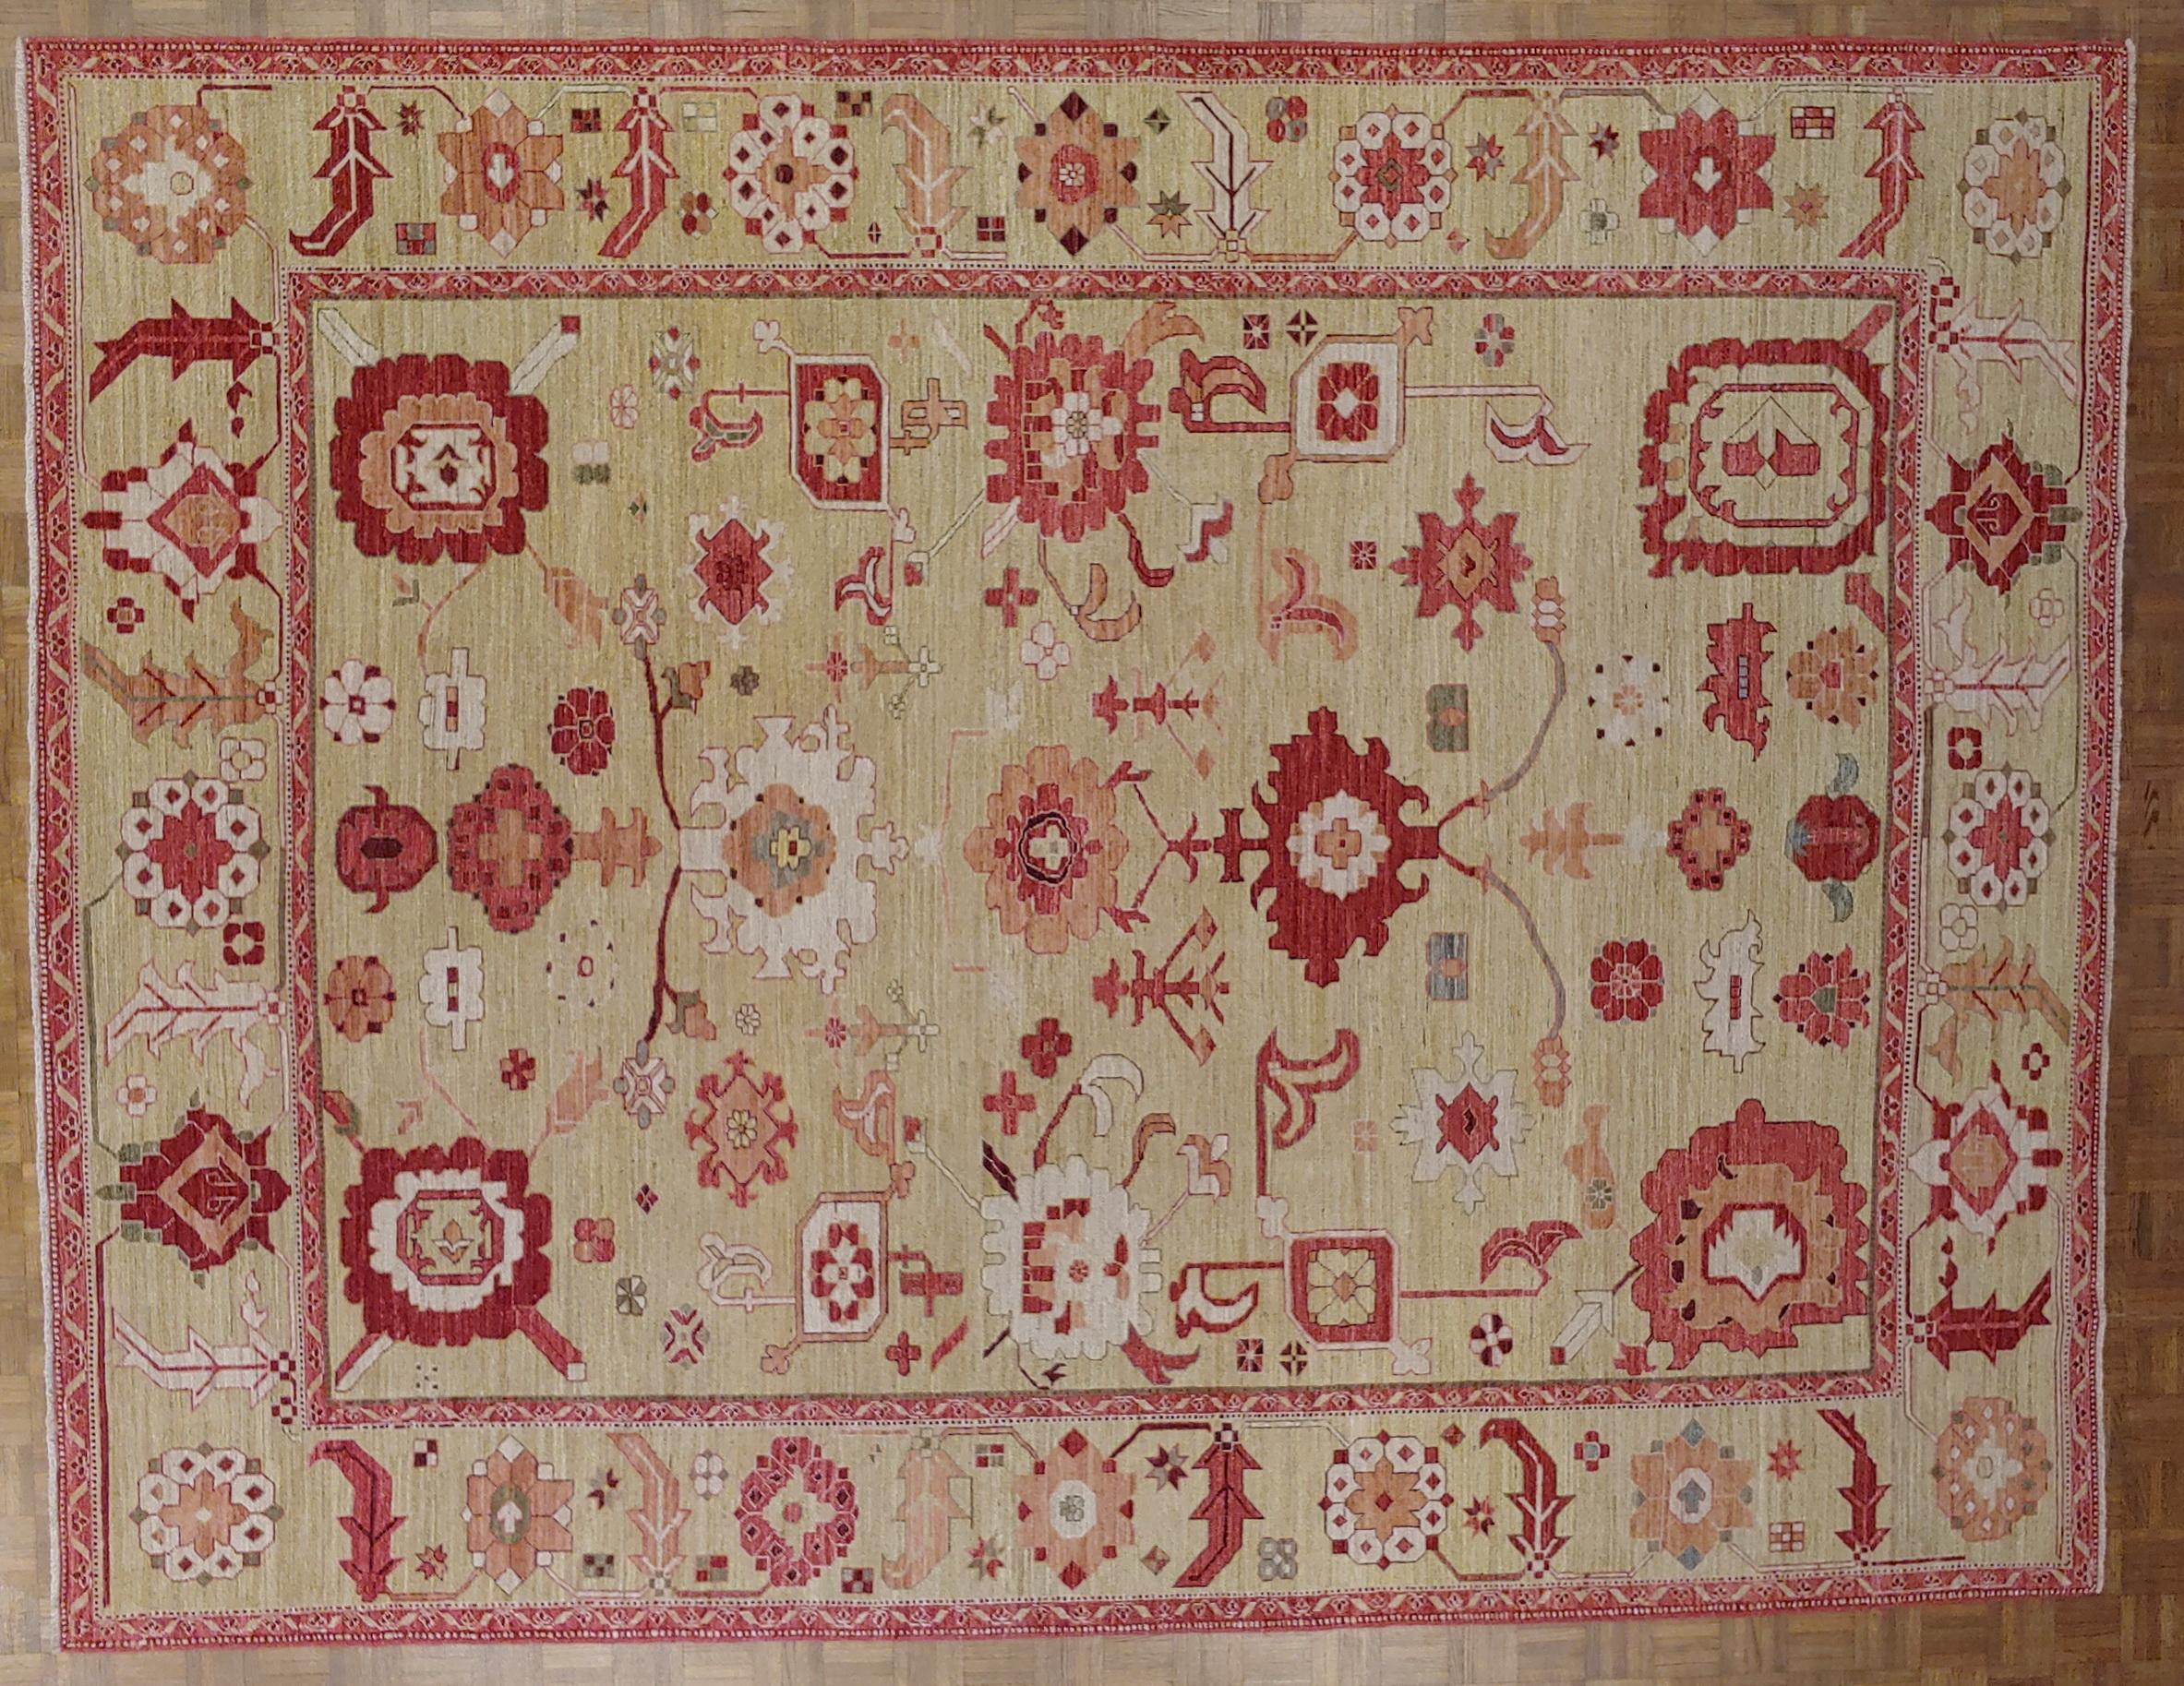 This is one our very best rugs. Hand woven in Afghanistan, these rugs offer a superior hand-spun wool and a striking medley of wonderful, all natural dyes. This rug is reminiscent of an early Sultanabad motif with classic Turkish Oushak colors of